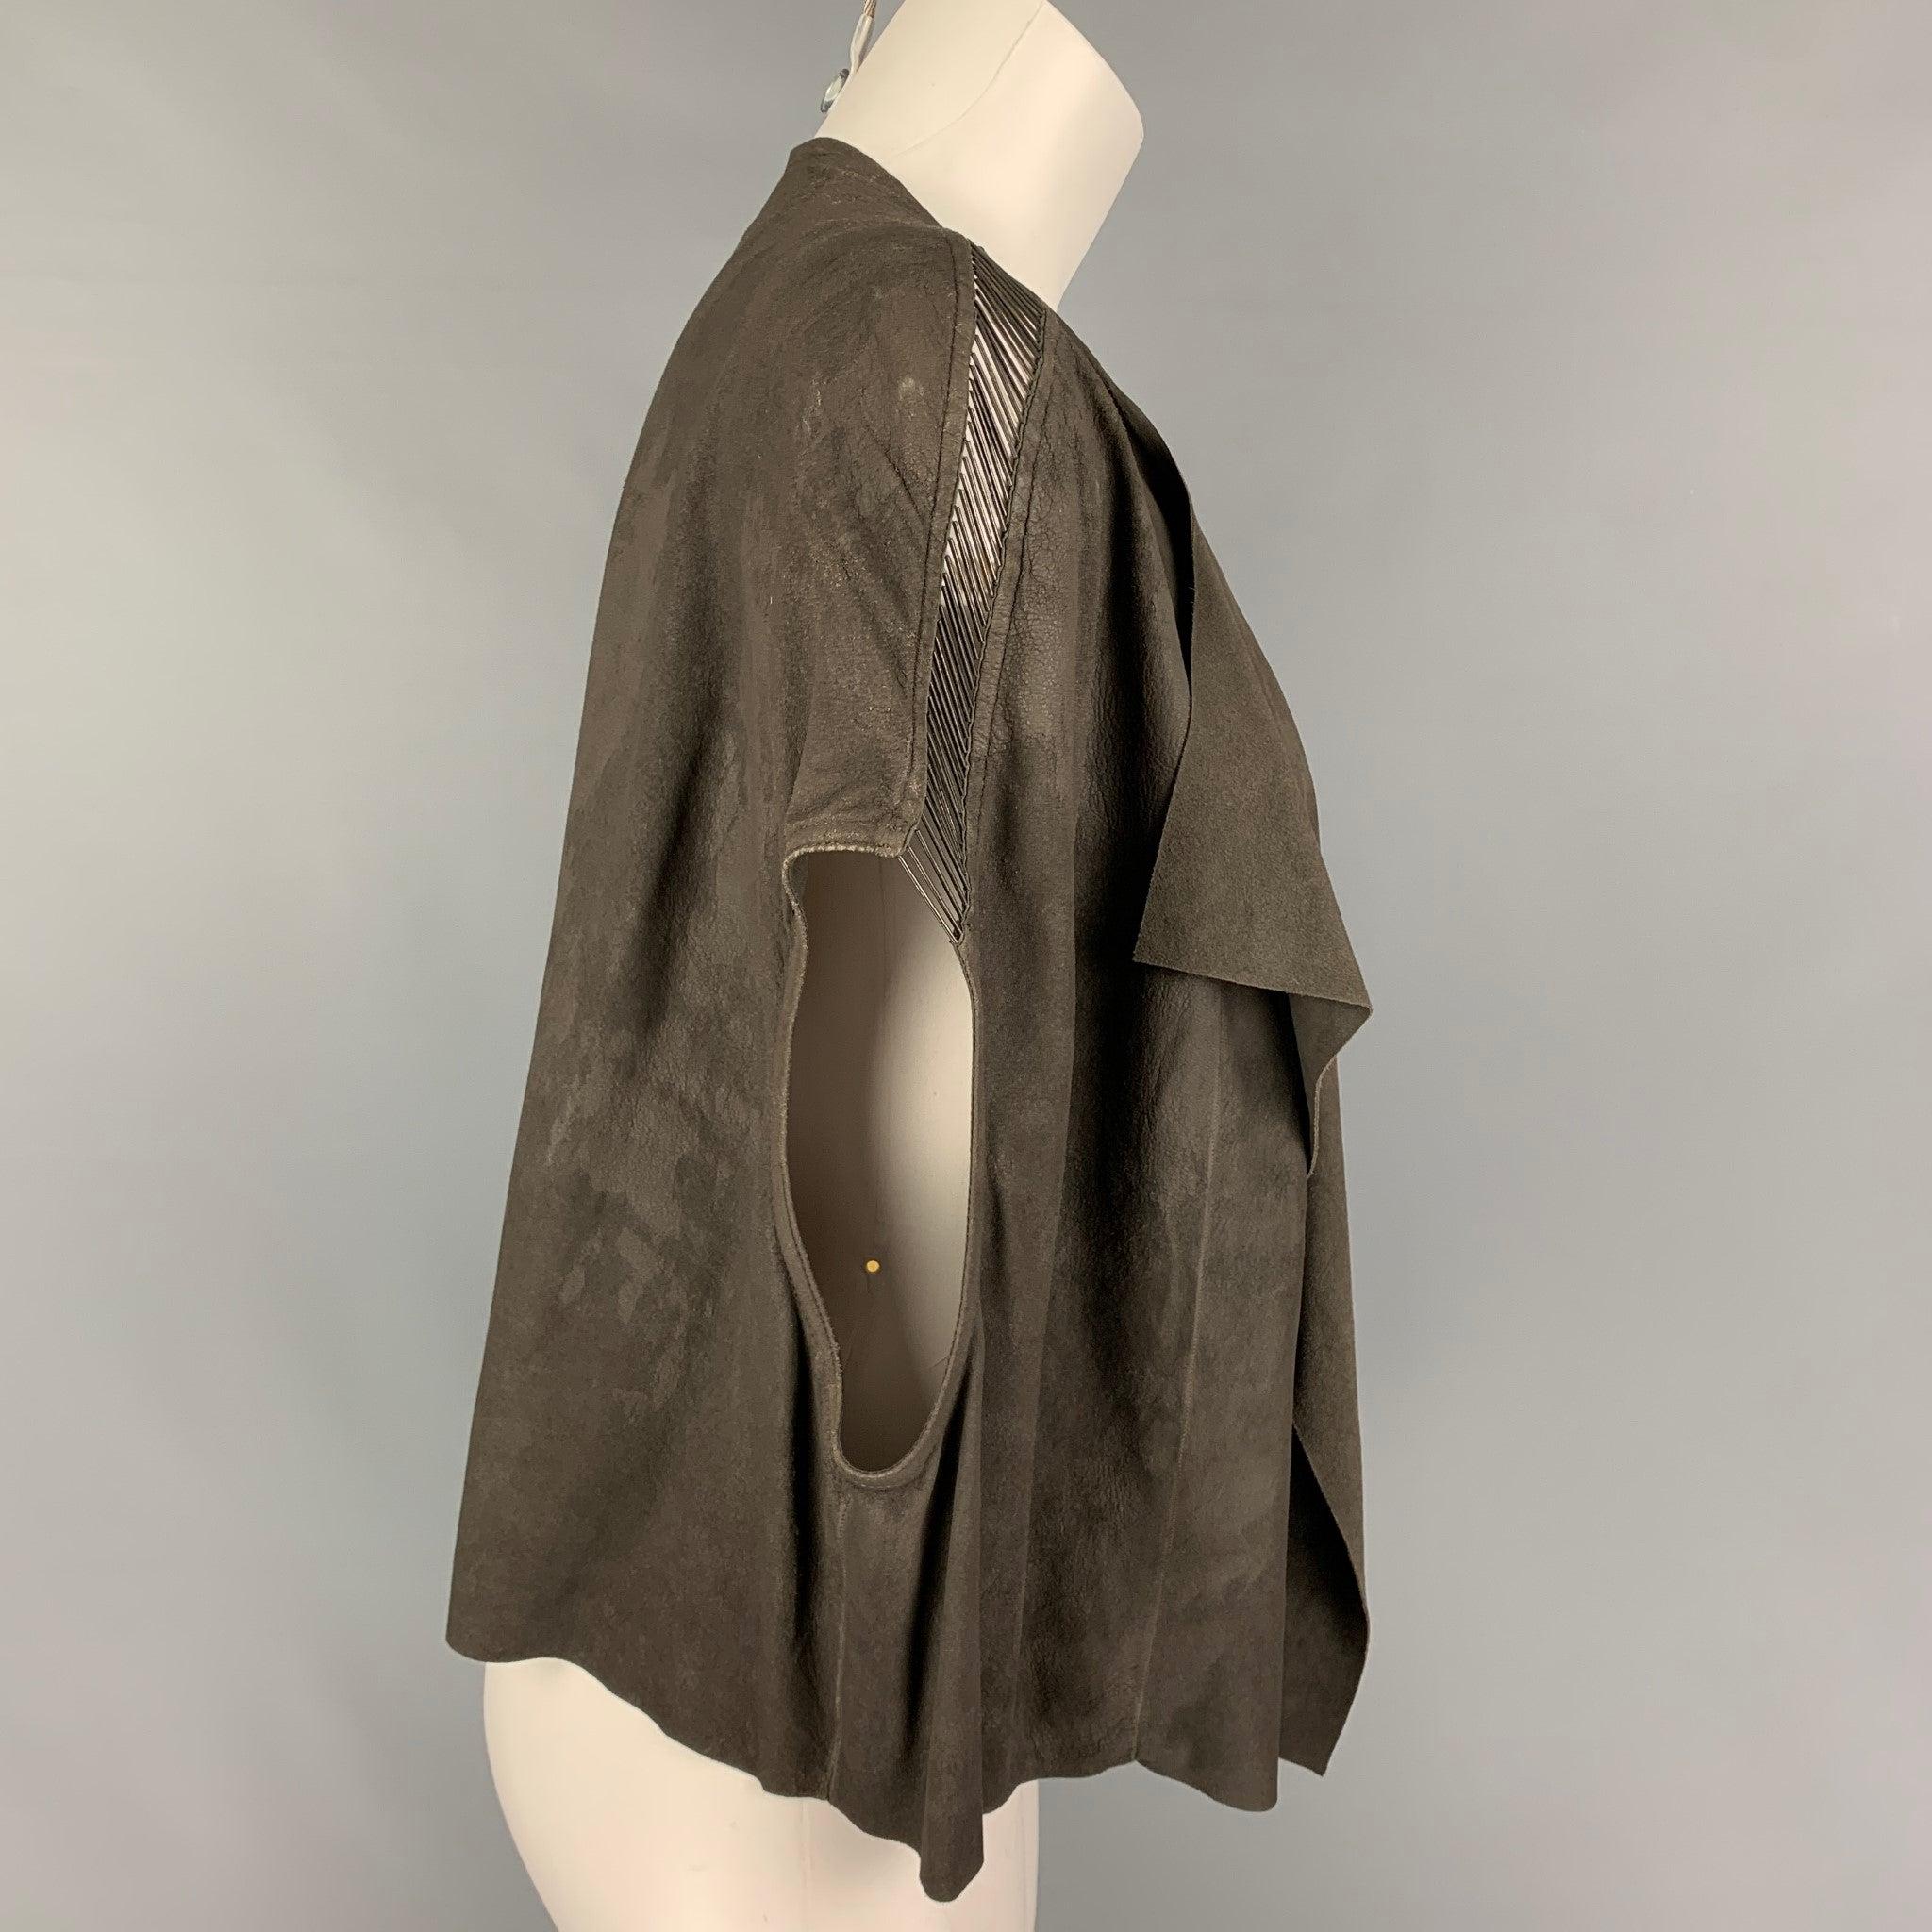 RICK OWENS 'DIRT' SS 18 vest comes in a grey suede featuring a draped style, shoulder metal embellishments, and a open front.Very Good
Pre-Owned Condition. Fabric tag removed.  

Marked:   Size tag removed 

Measurements: 
 
Shoulder: 23 inches 